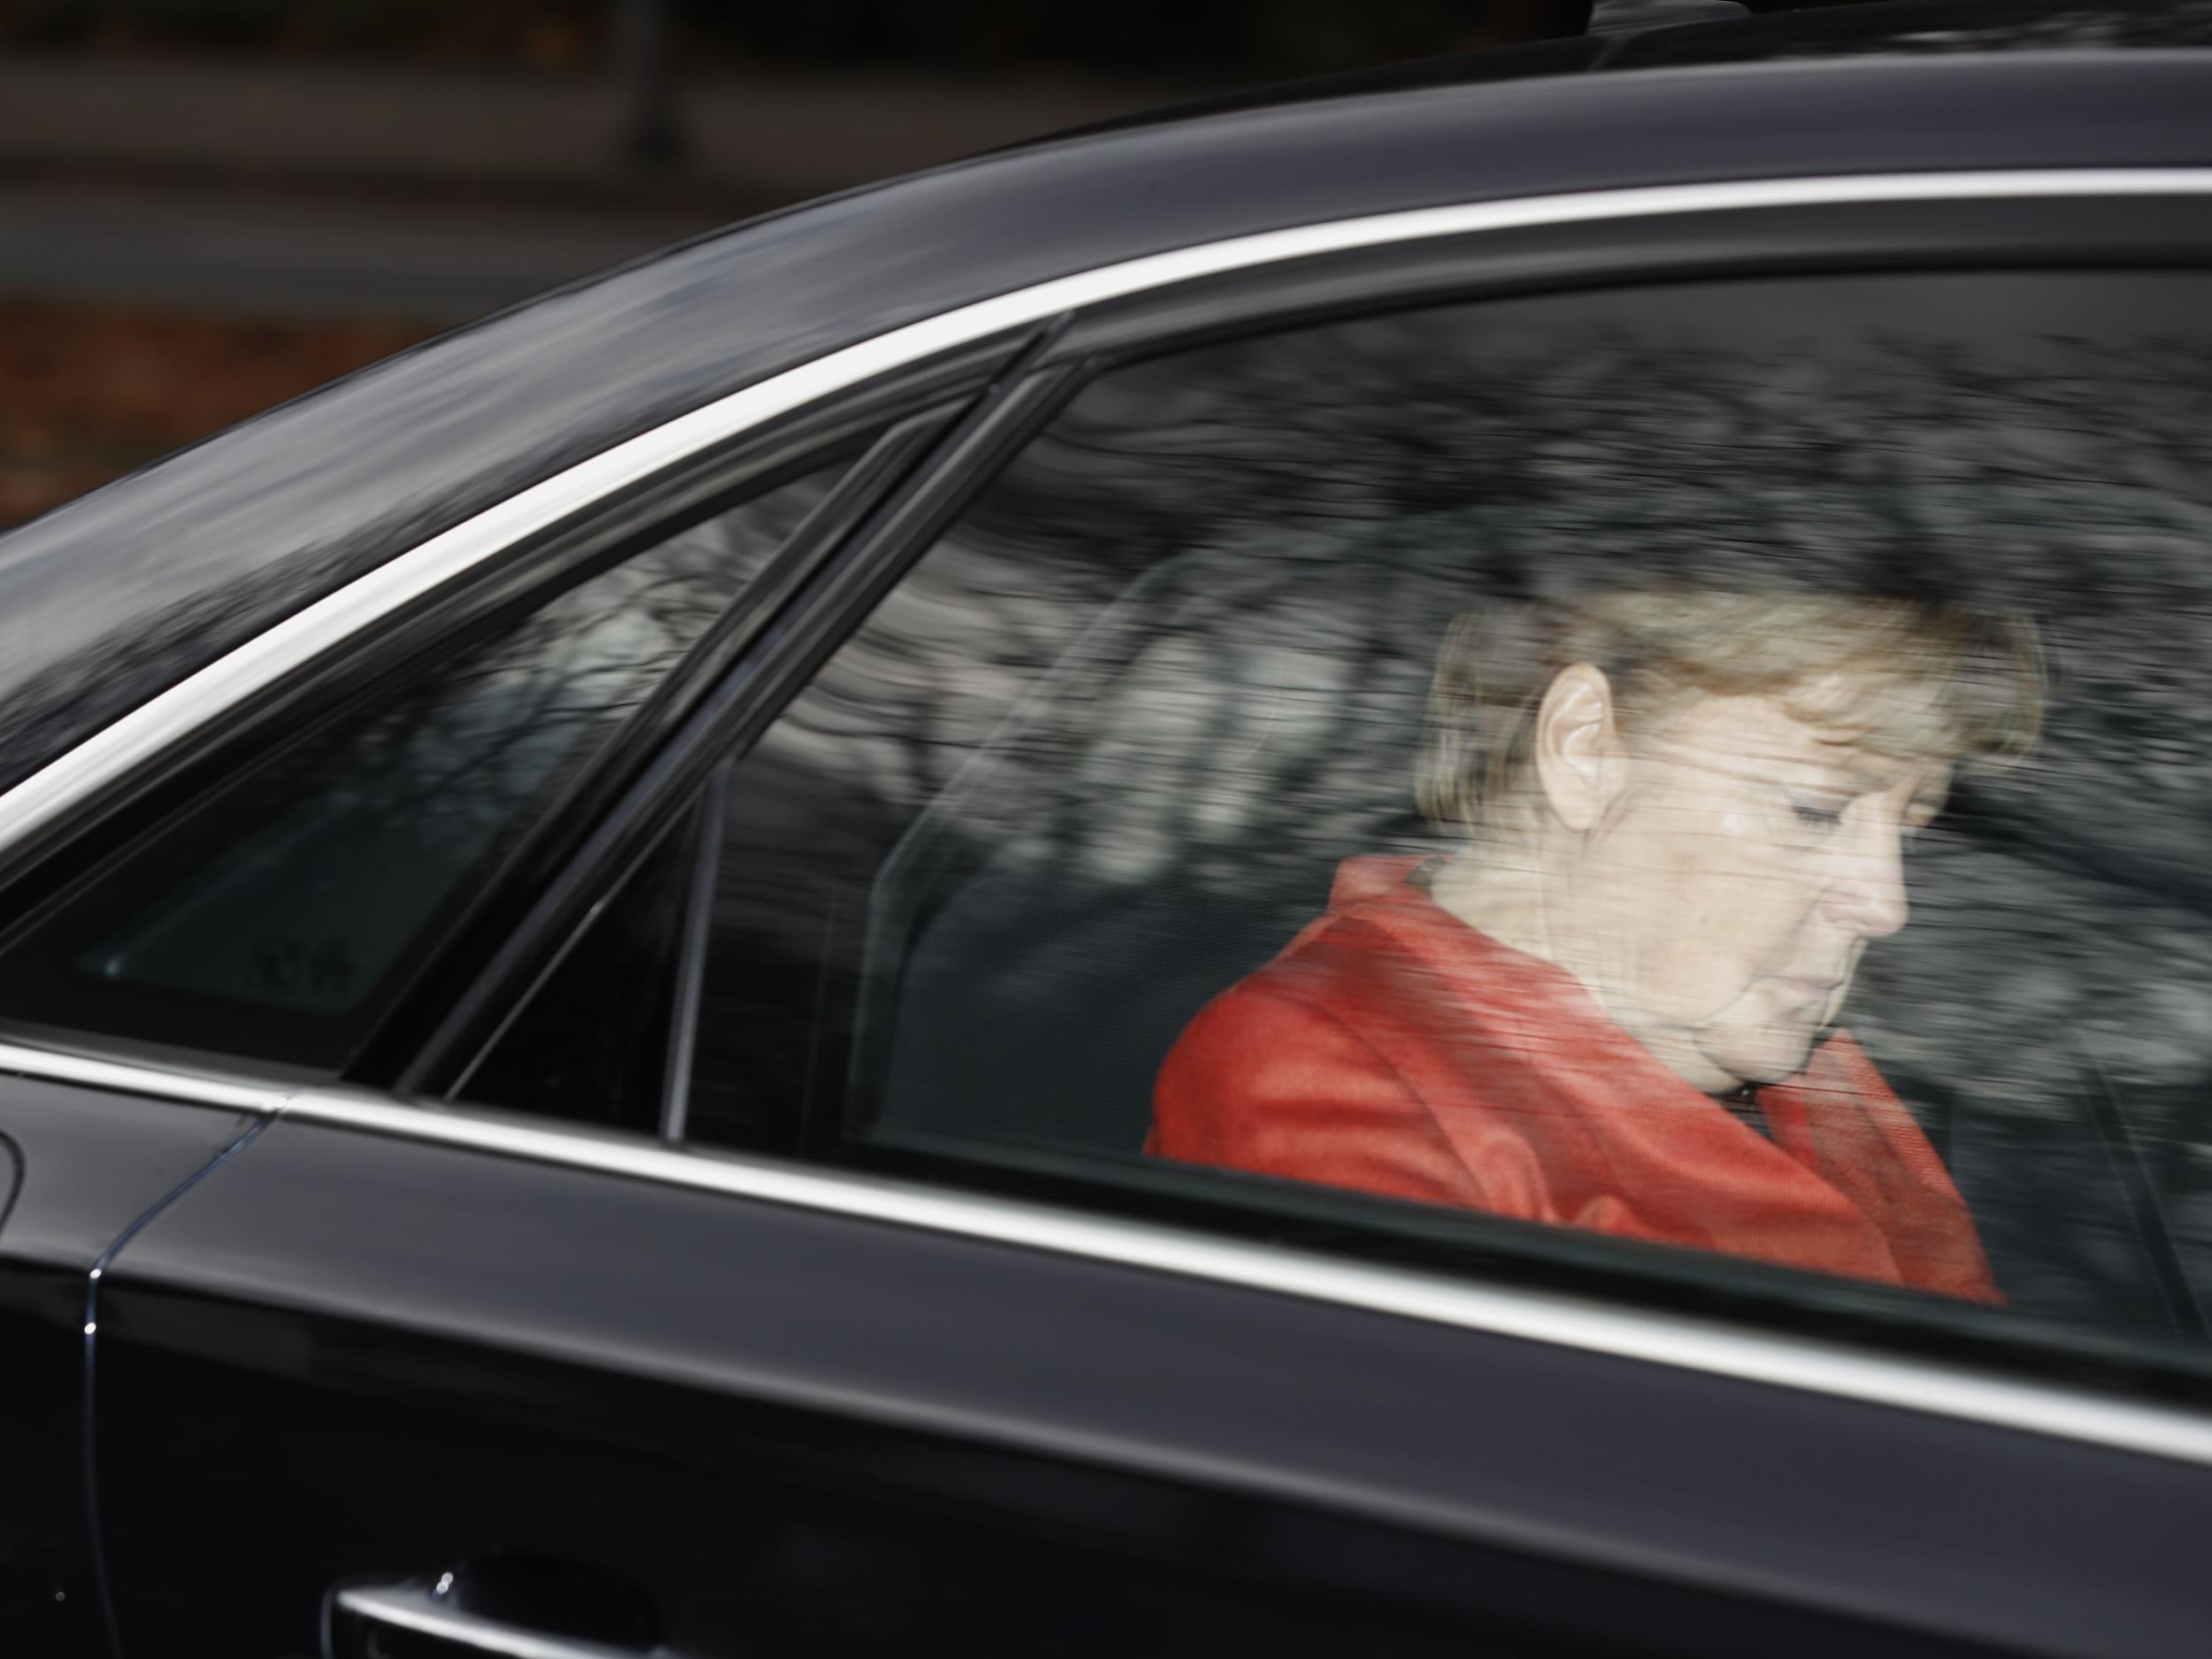 Germany is facing the worst political crisis in its modern history